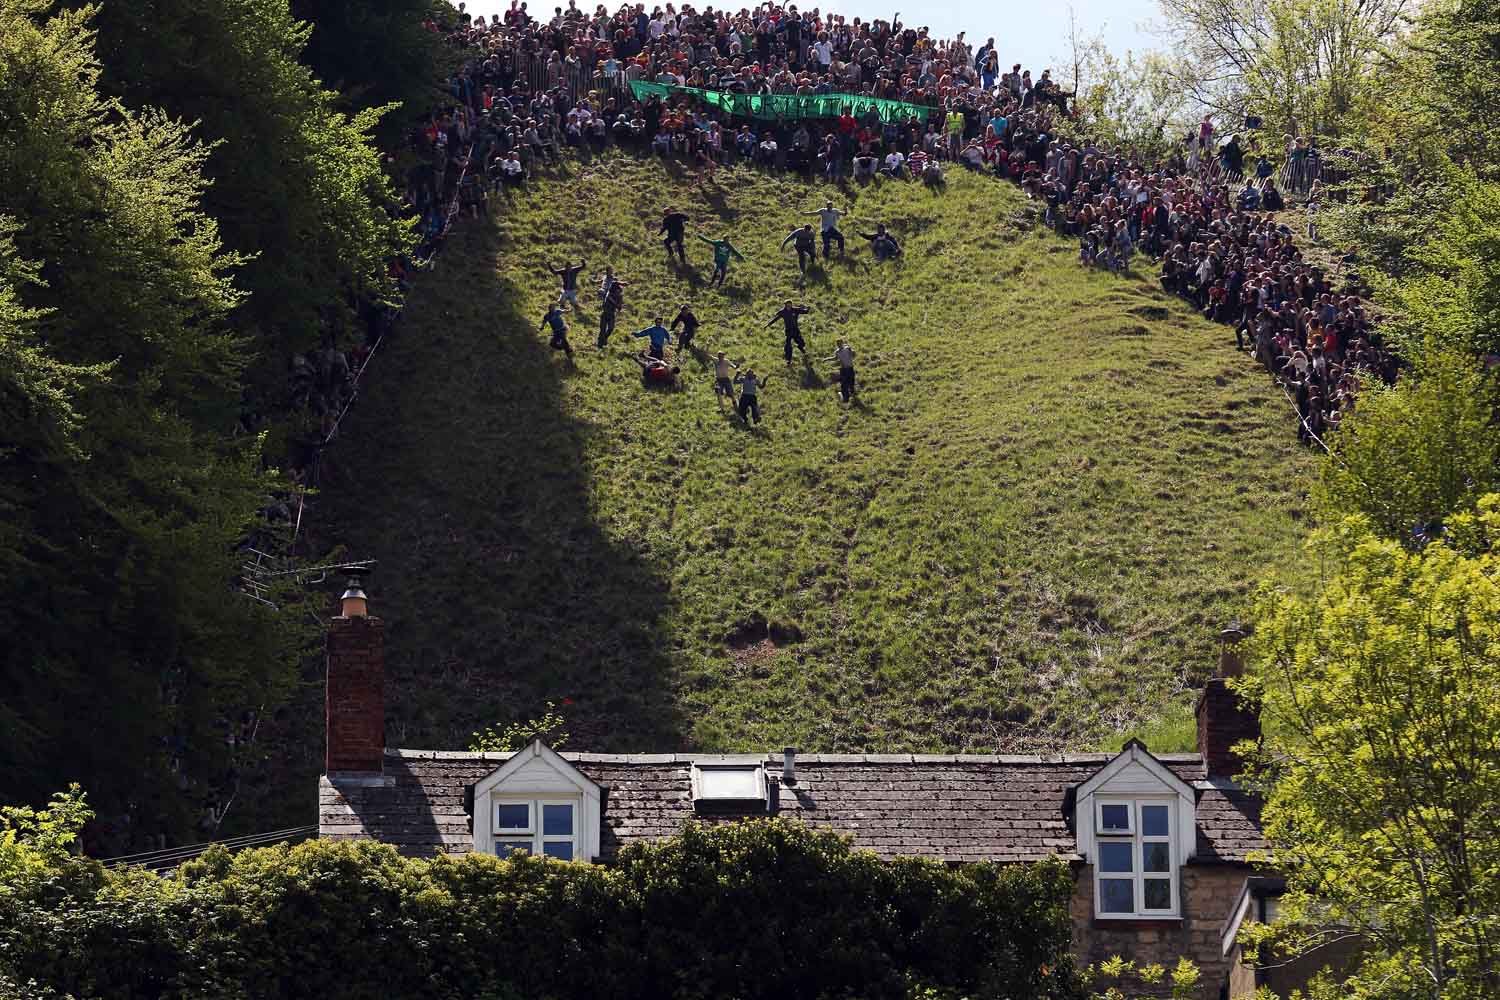 May 27, 2013. Contestants in the men's race chase a replica Double Gloucester Cheese down the steep gradient of Cooper's Hill during the annual Bank Holiday tradition of cheese-rolling in Brockworth, Gloucestershire, England.